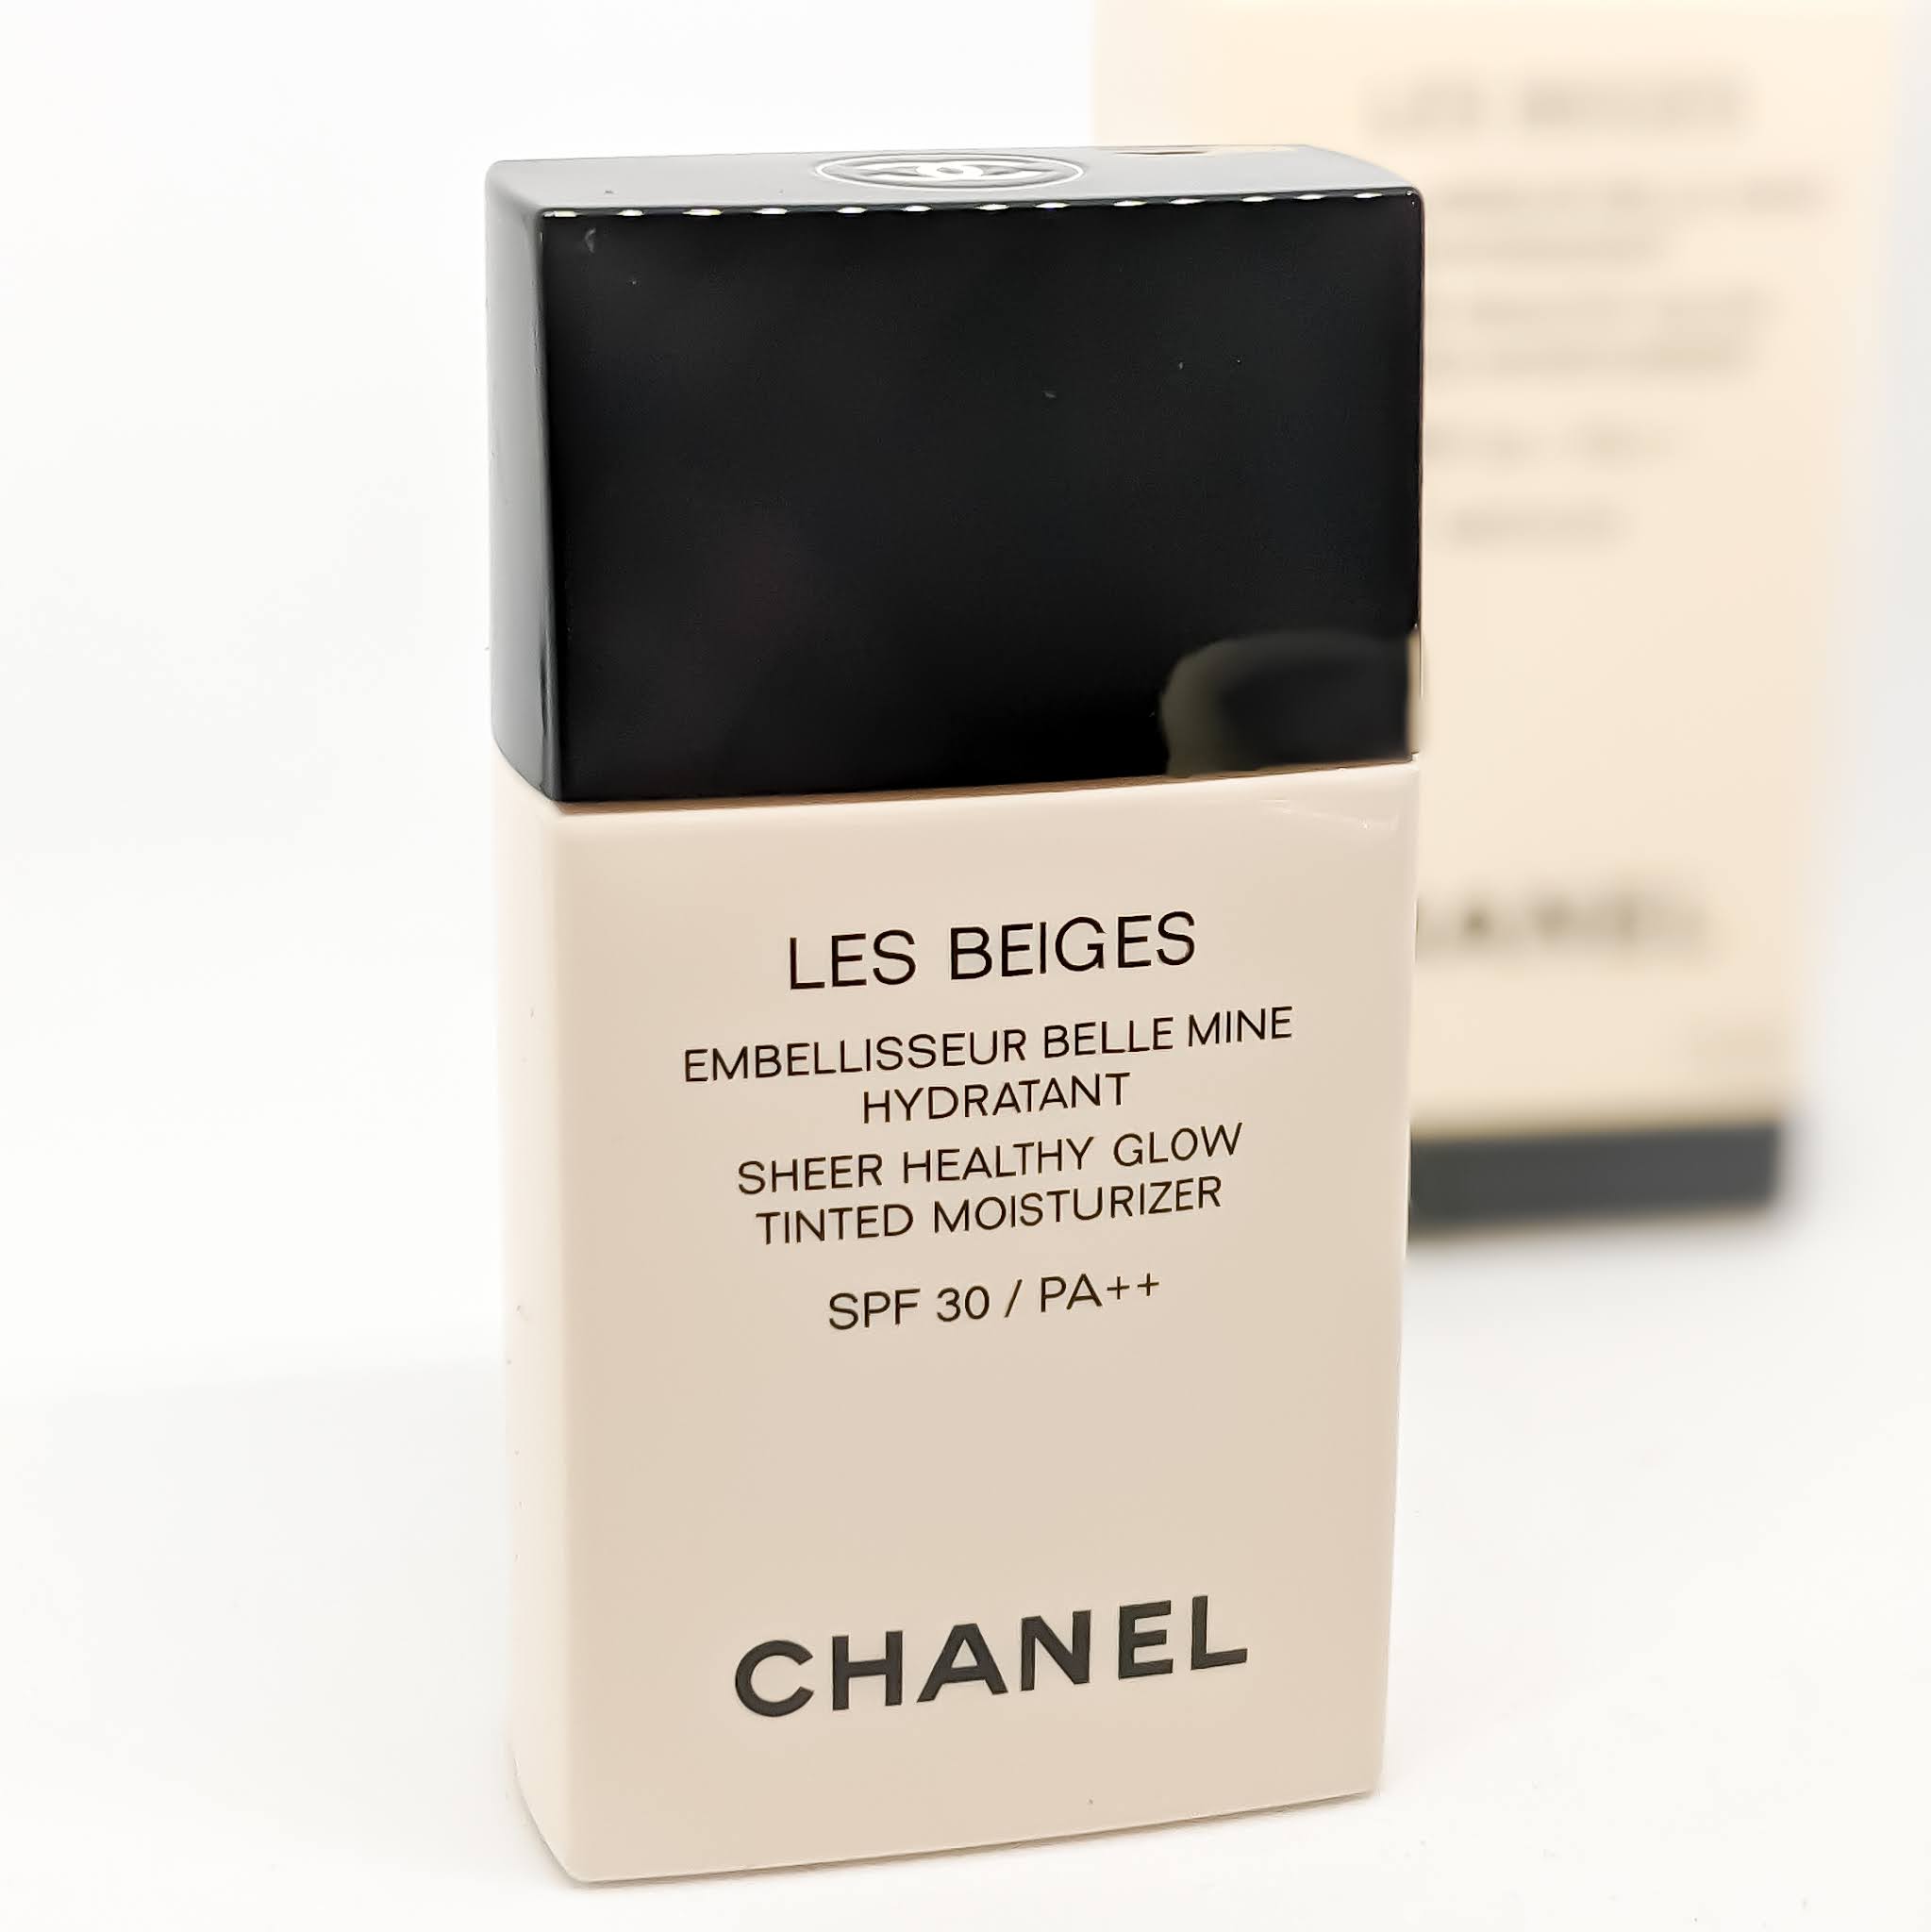 Les Beiges Sheer Healthy Glow Tinted Moisturizer SPF 30 - Deep by Chanel  for Women - 1 oz Foundation